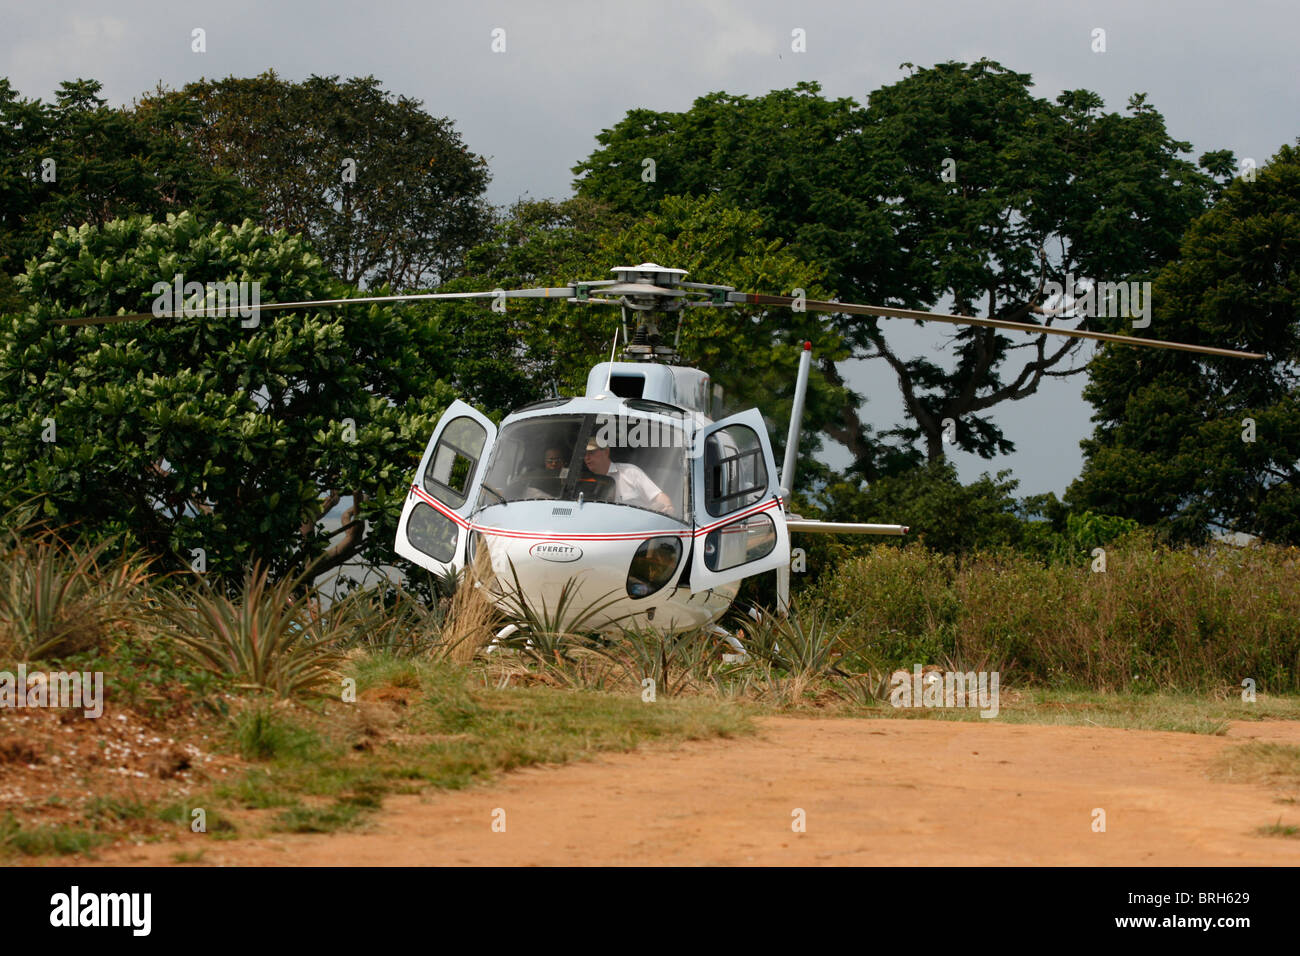 A Eurocopter AS350-B2 (Ecureuil/Squirrel) about to take off from an island in Lake Victoria, Uganda Stock Photo